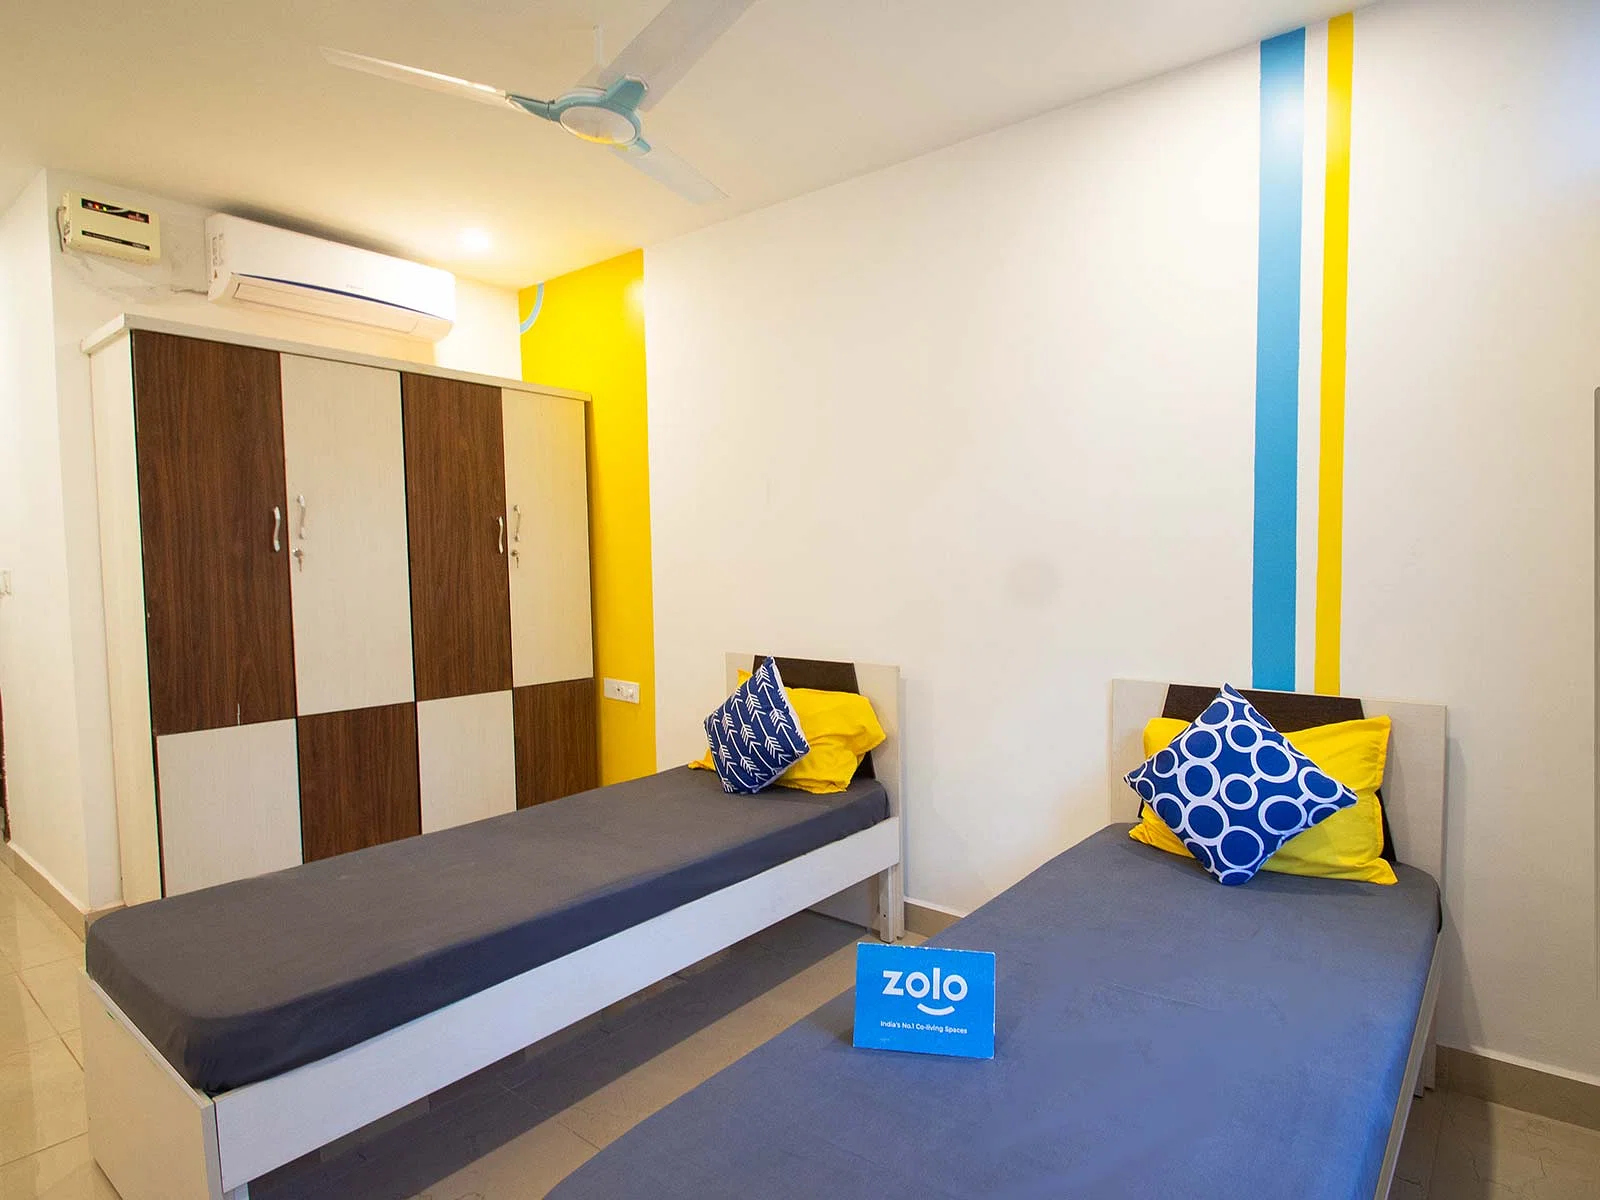 budget-friendly PGs and hostels for unisex with single rooms with daily hopusekeeping-Zolo Sierra